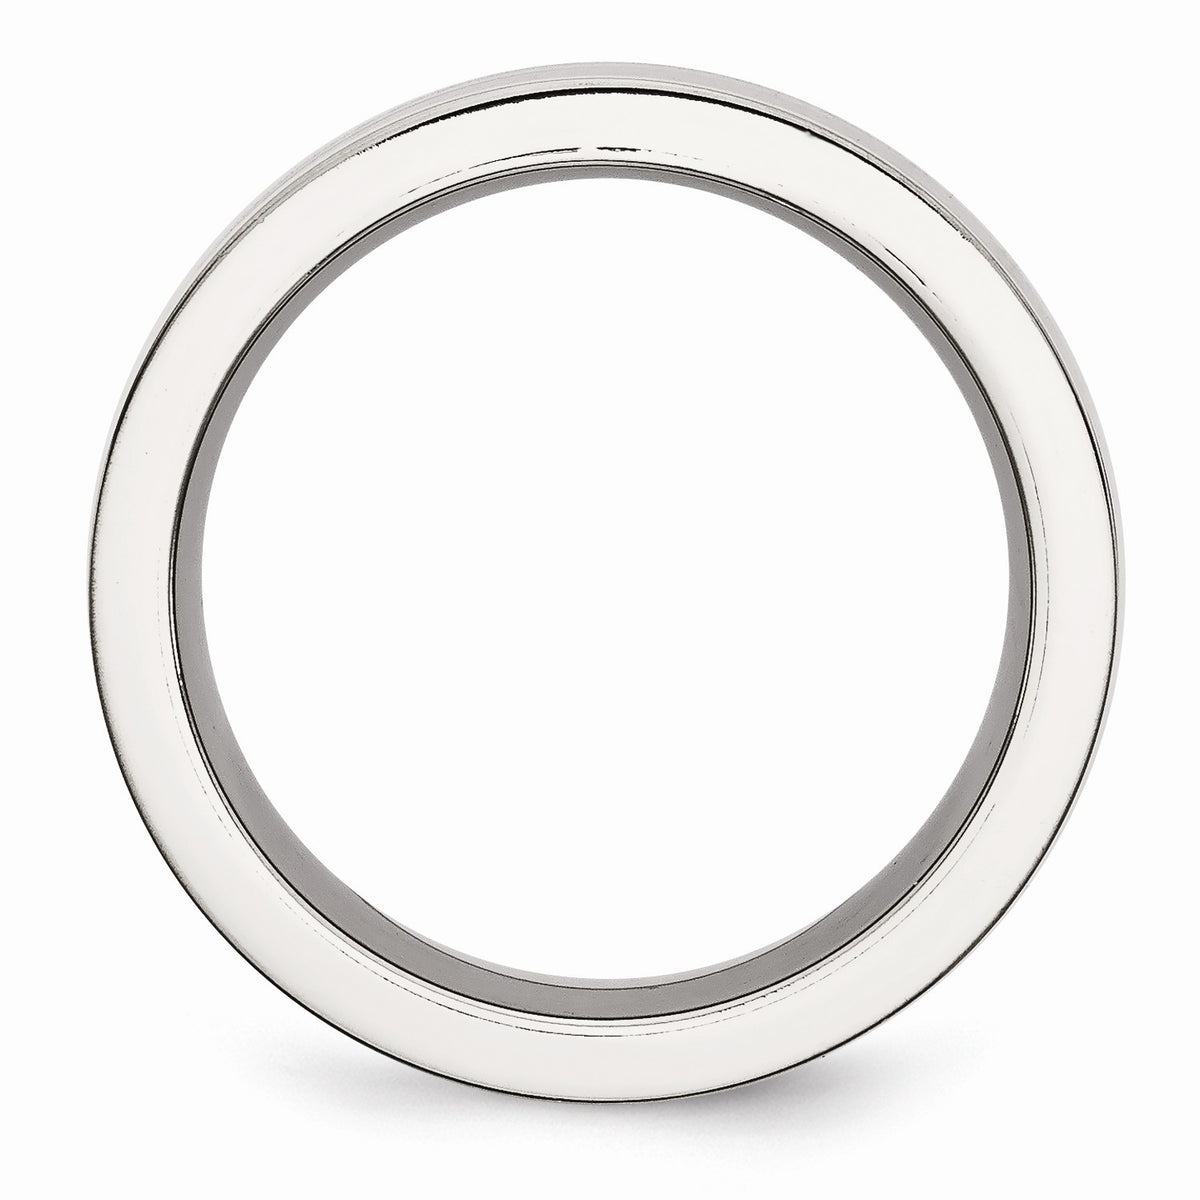 Alternate view of the 8mm Polished Stainless Steel and Black Ceramic Flat Band by The Black Bow Jewelry Co.